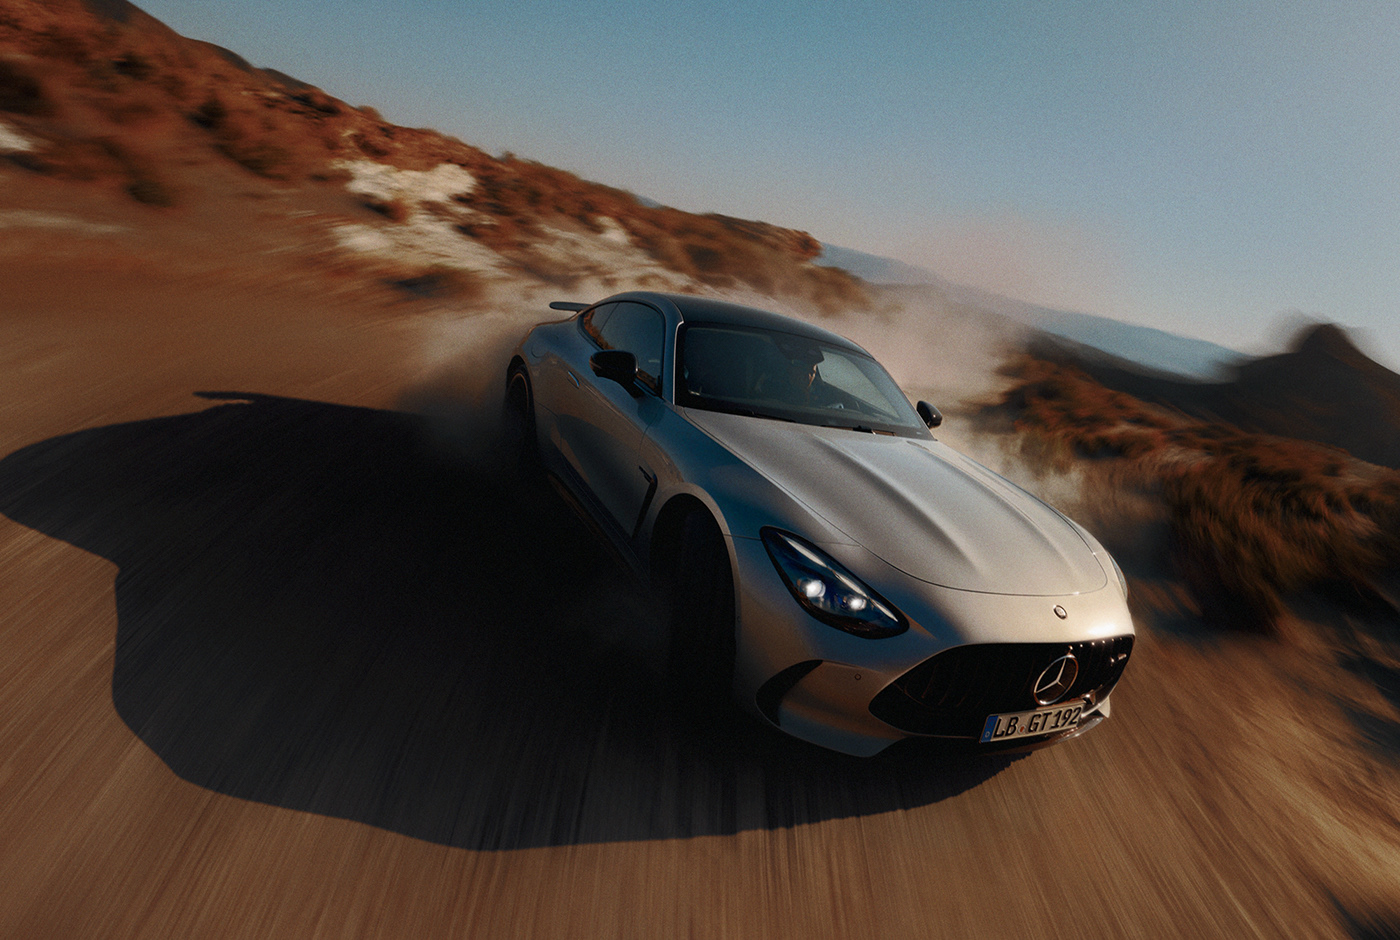 Matthew Jones captures of the all-new Mercedes-Benz AMG GT drifting. Photographed in Almeria, Spain